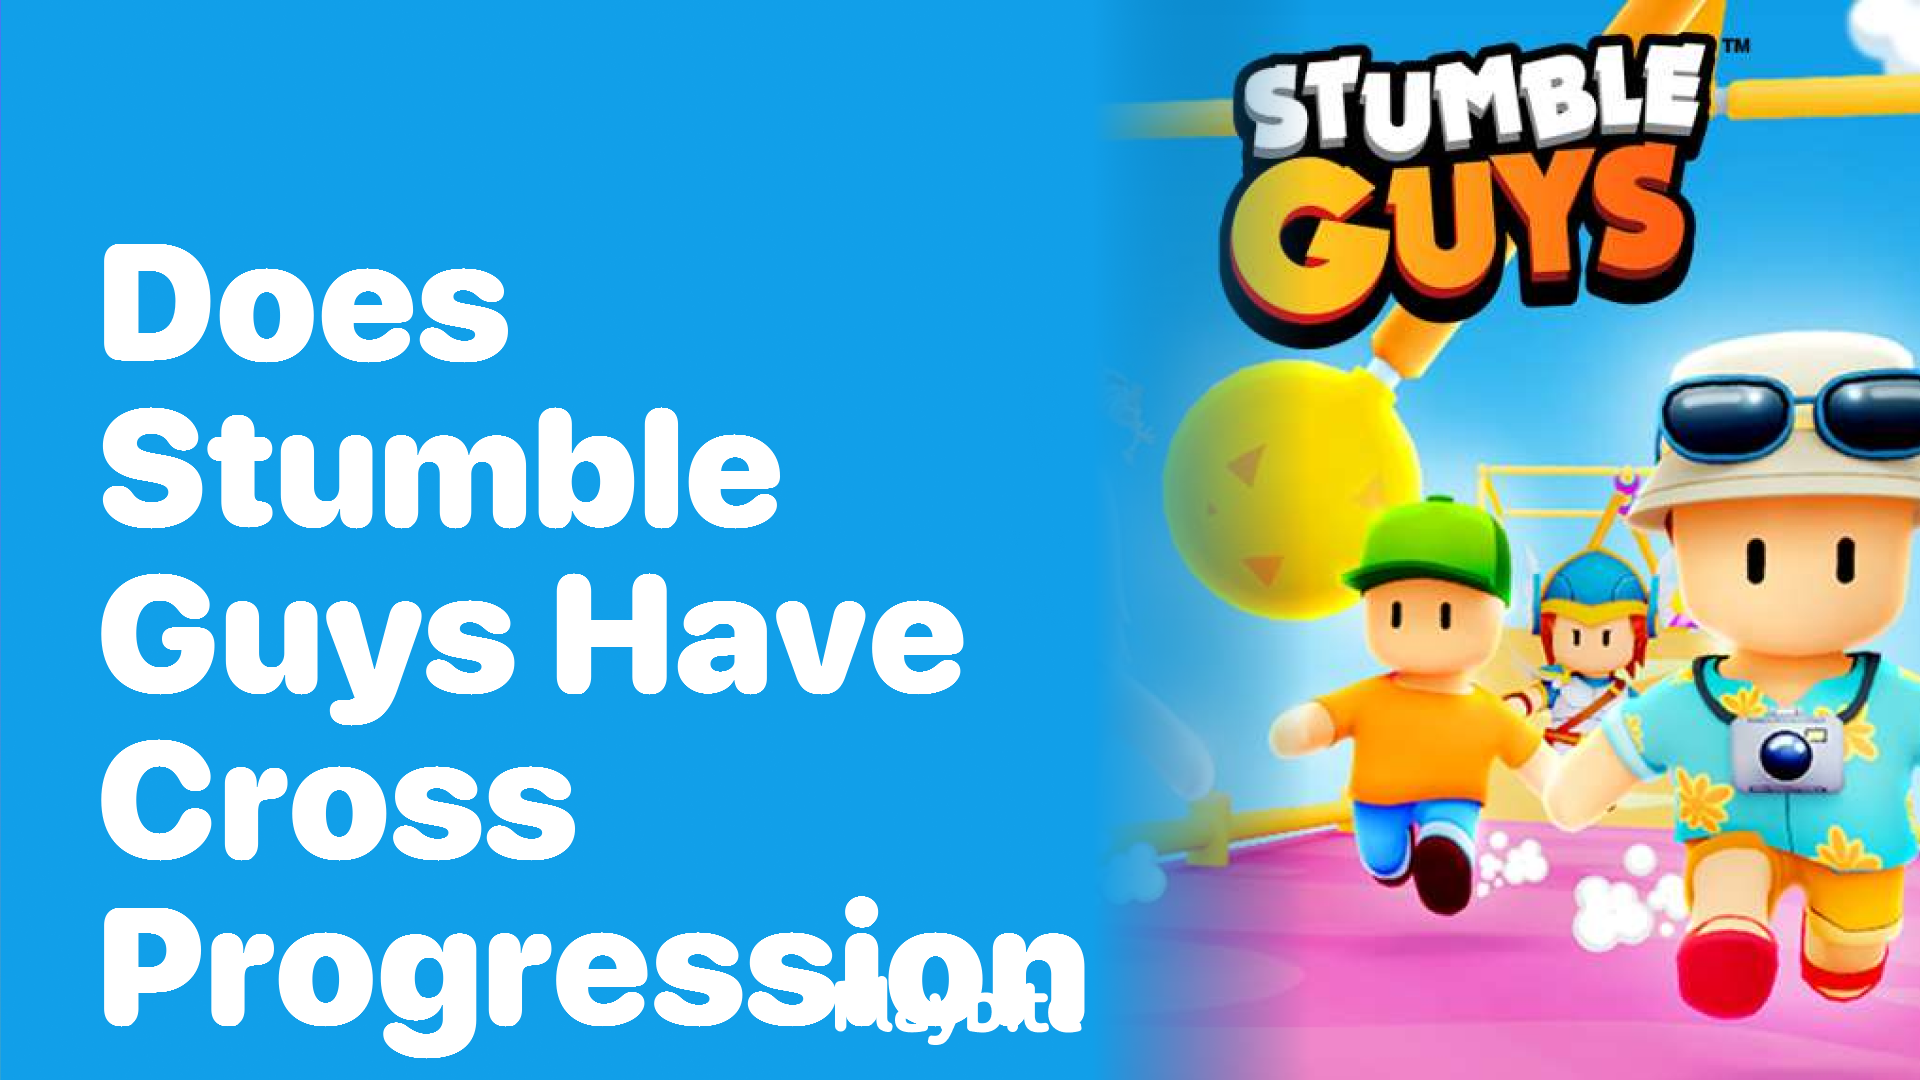 Does Stumble Guys Have Cross Progression? Find Out Here!